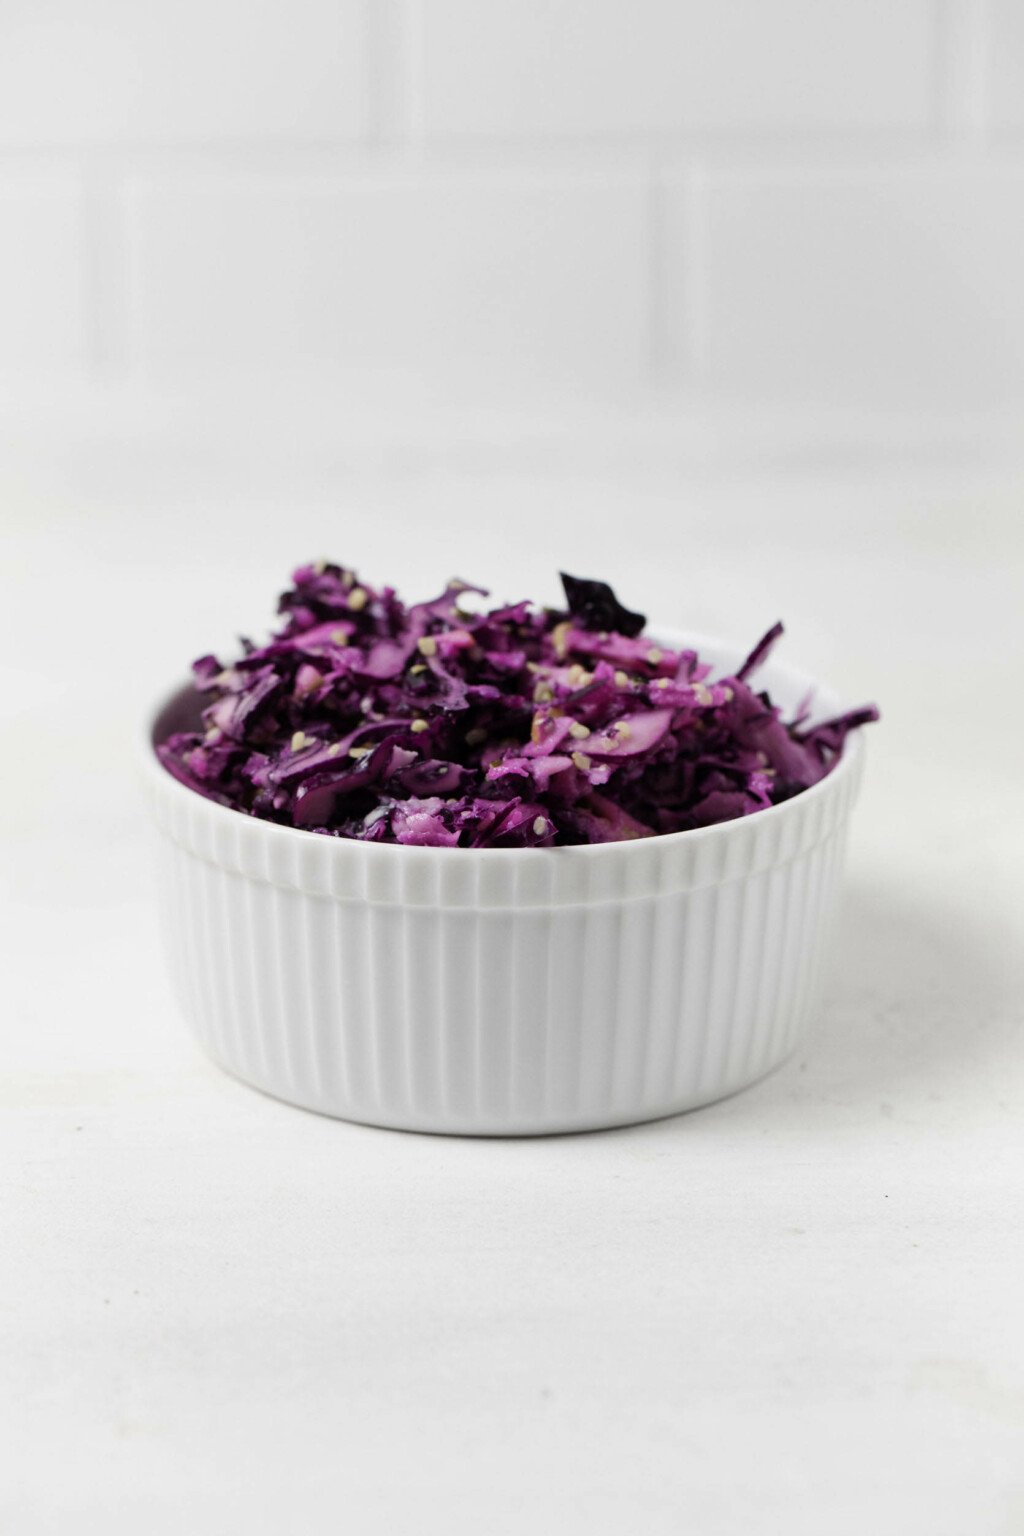 An apple cabbage slaw with tahini has been placed in a small, round white bowl. It rests against a white backdrop.